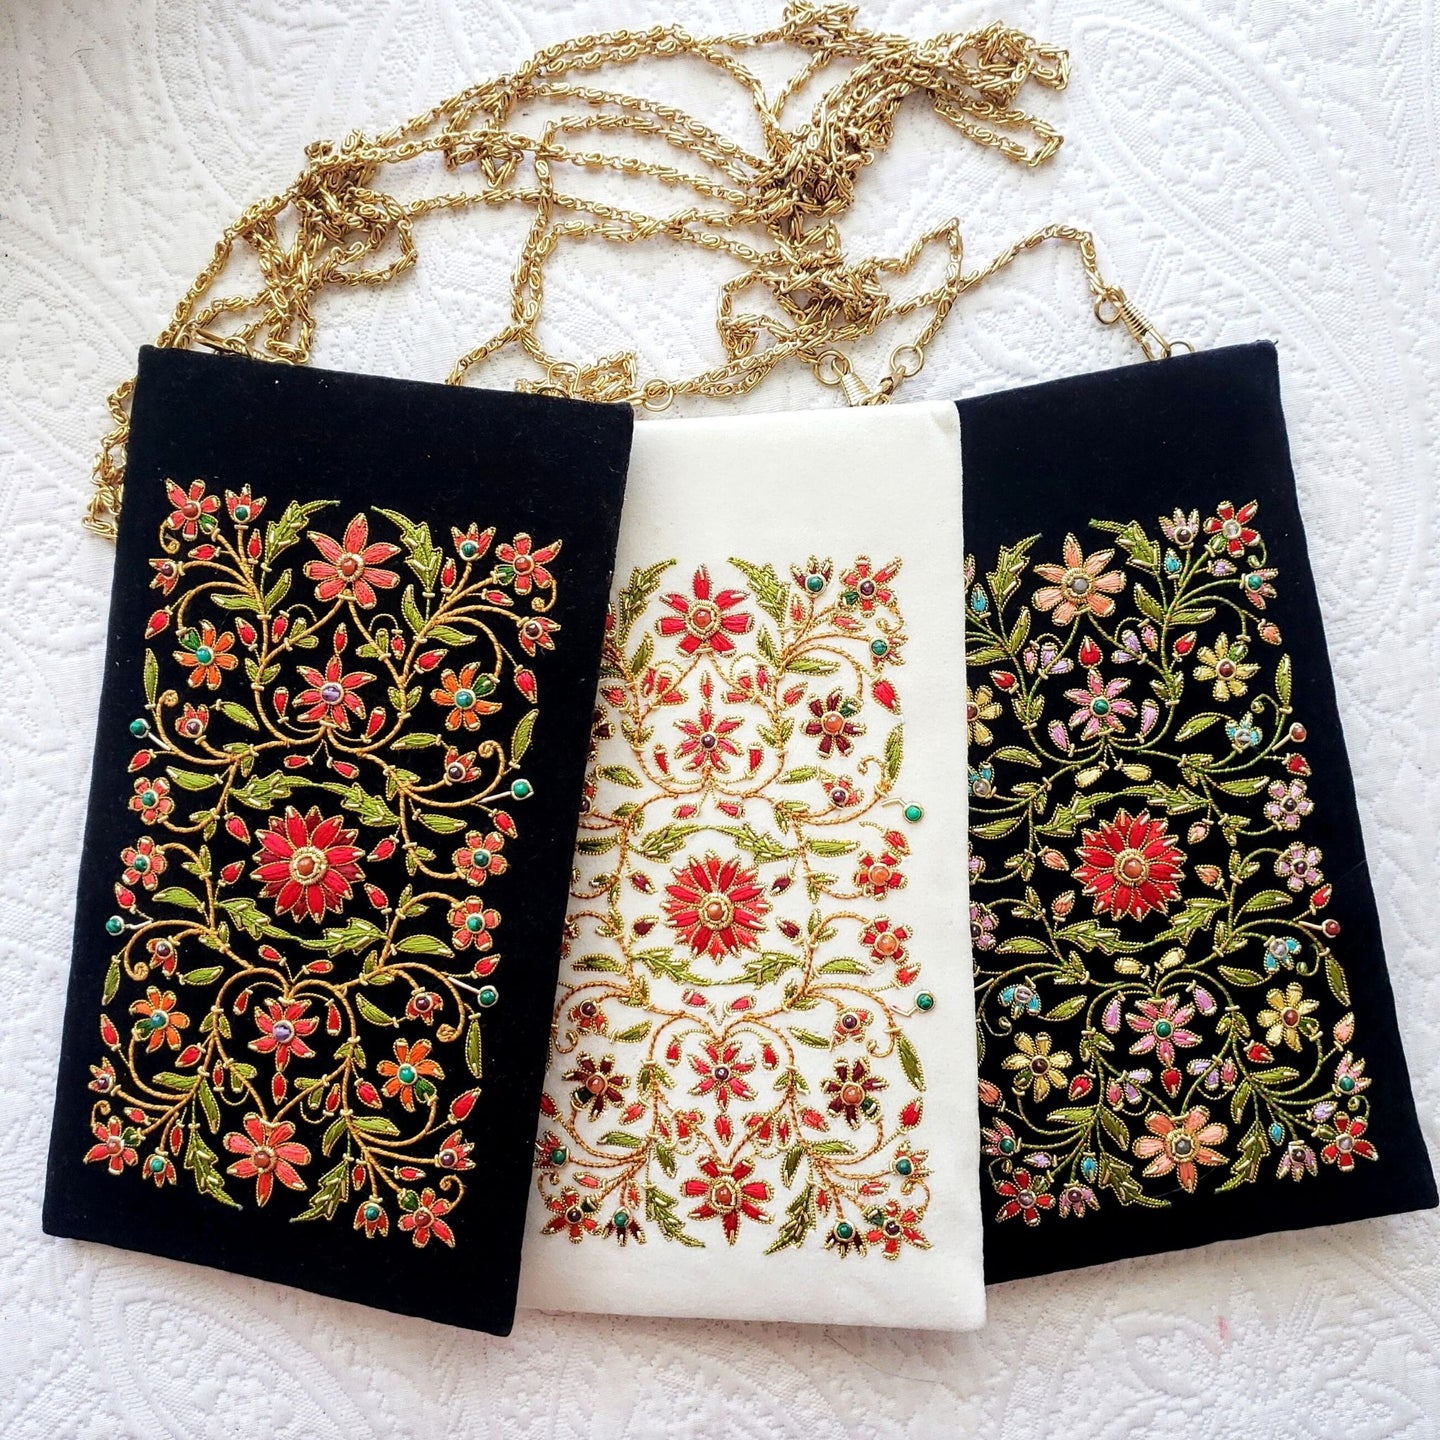 Three hand embroidered floral eyeglasses sunglasses cases on black or ivory velvet with chain. 